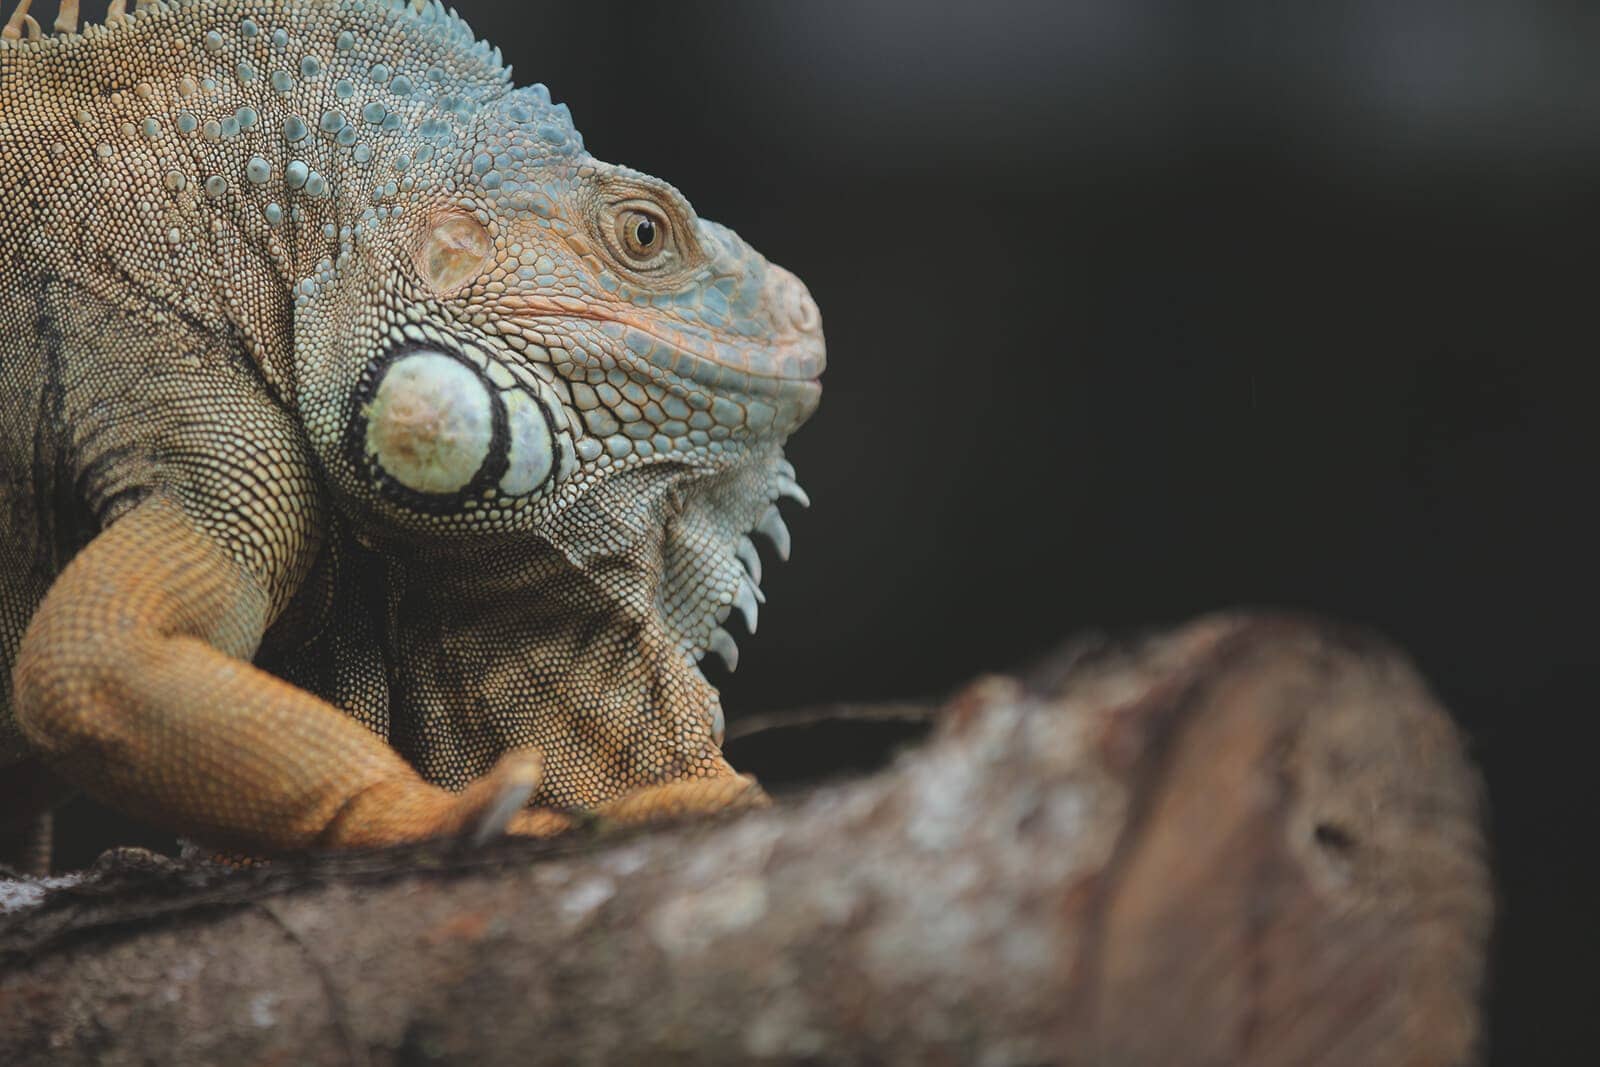 So What Lizards Eats In The Wild? Types And Diets Uncovered.